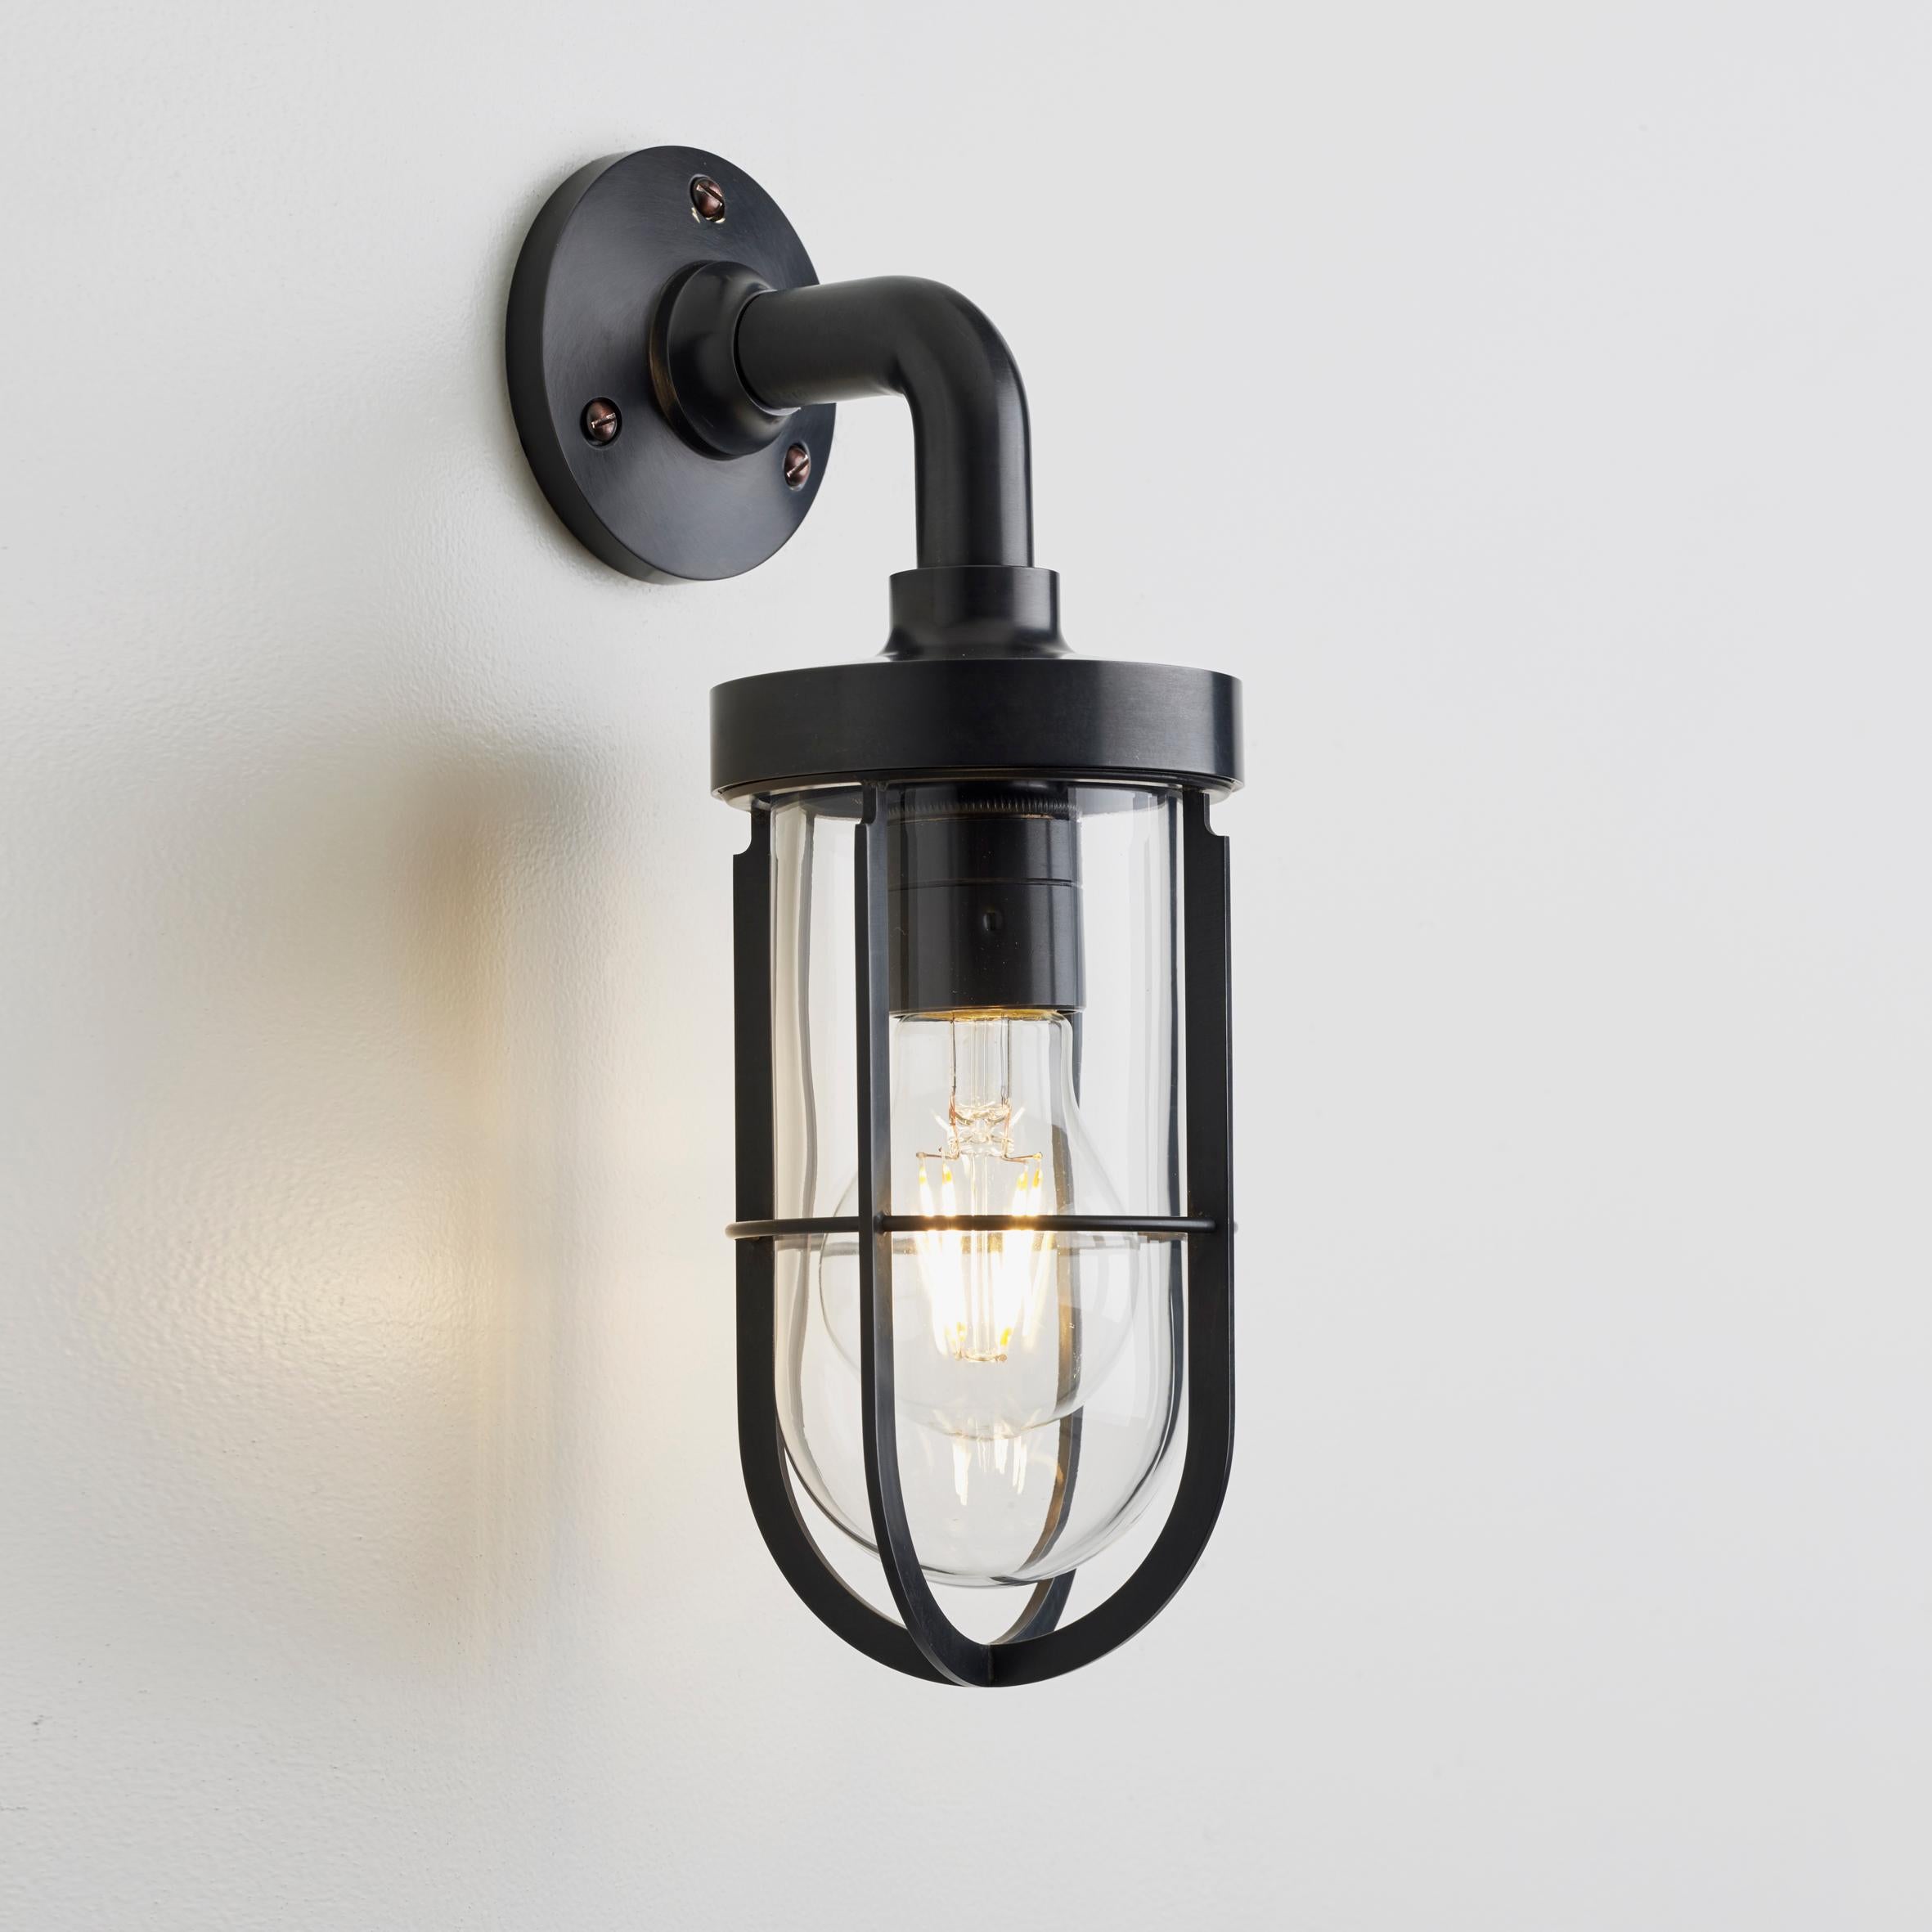 Wall light in solid brass with clear or frosted glass. For indoor and outdoor use (IP44). Note that bulb is not provided but can be sourced from Just Bulbs in NYC.

Lamp LED E27 230V 4W 2700K Retro A60. Main power 230V 50Hz.